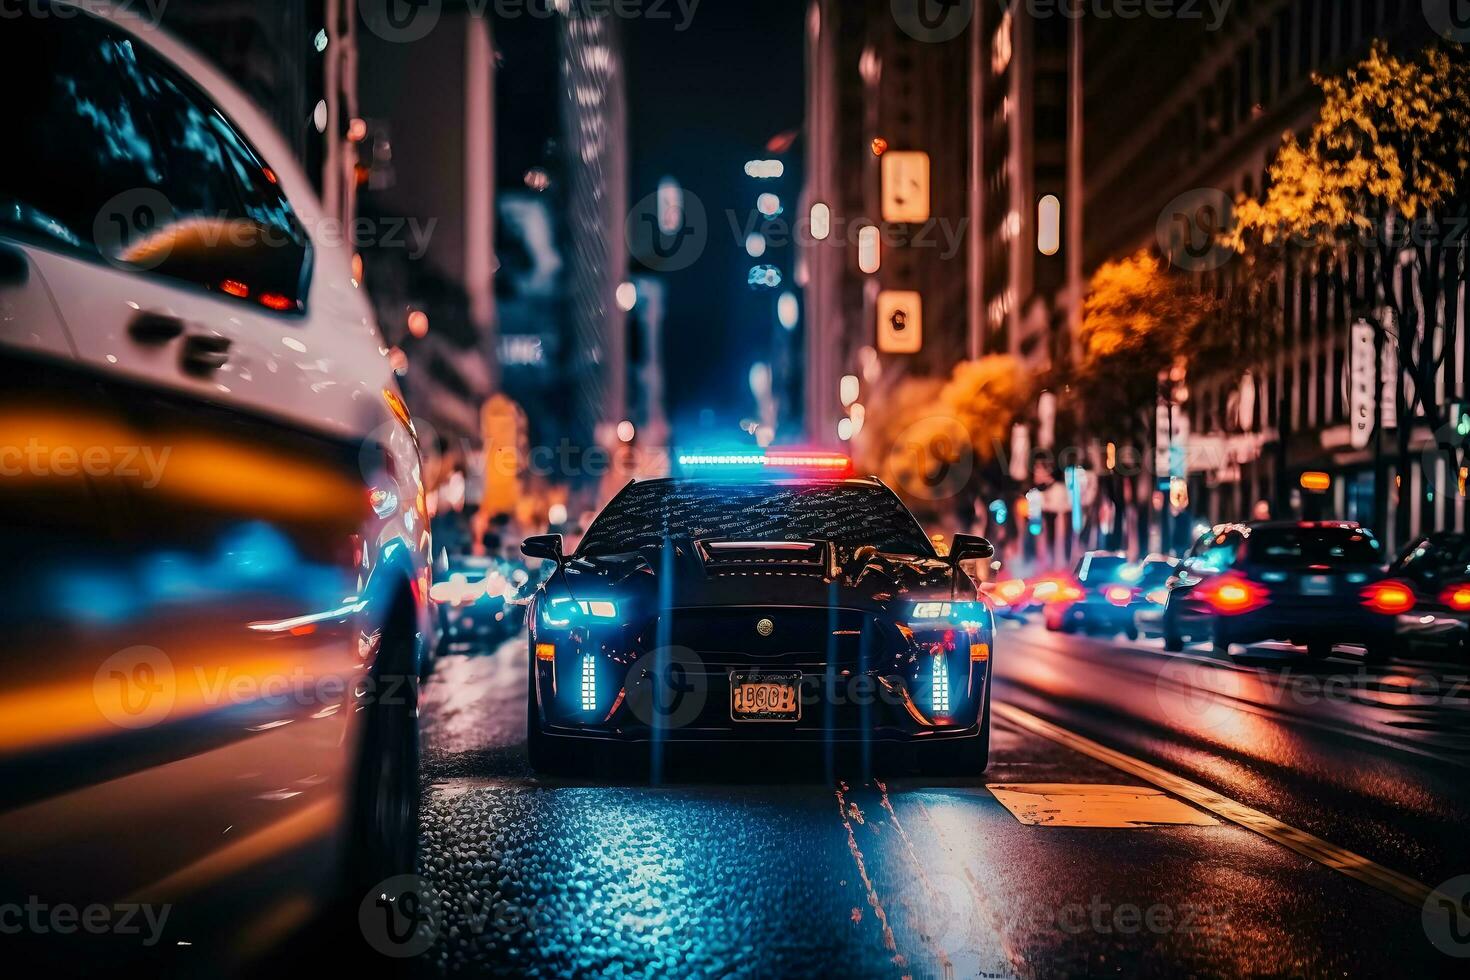 Blue light flasher atop of a police car. City lights on the background. Neural network AI generated photo